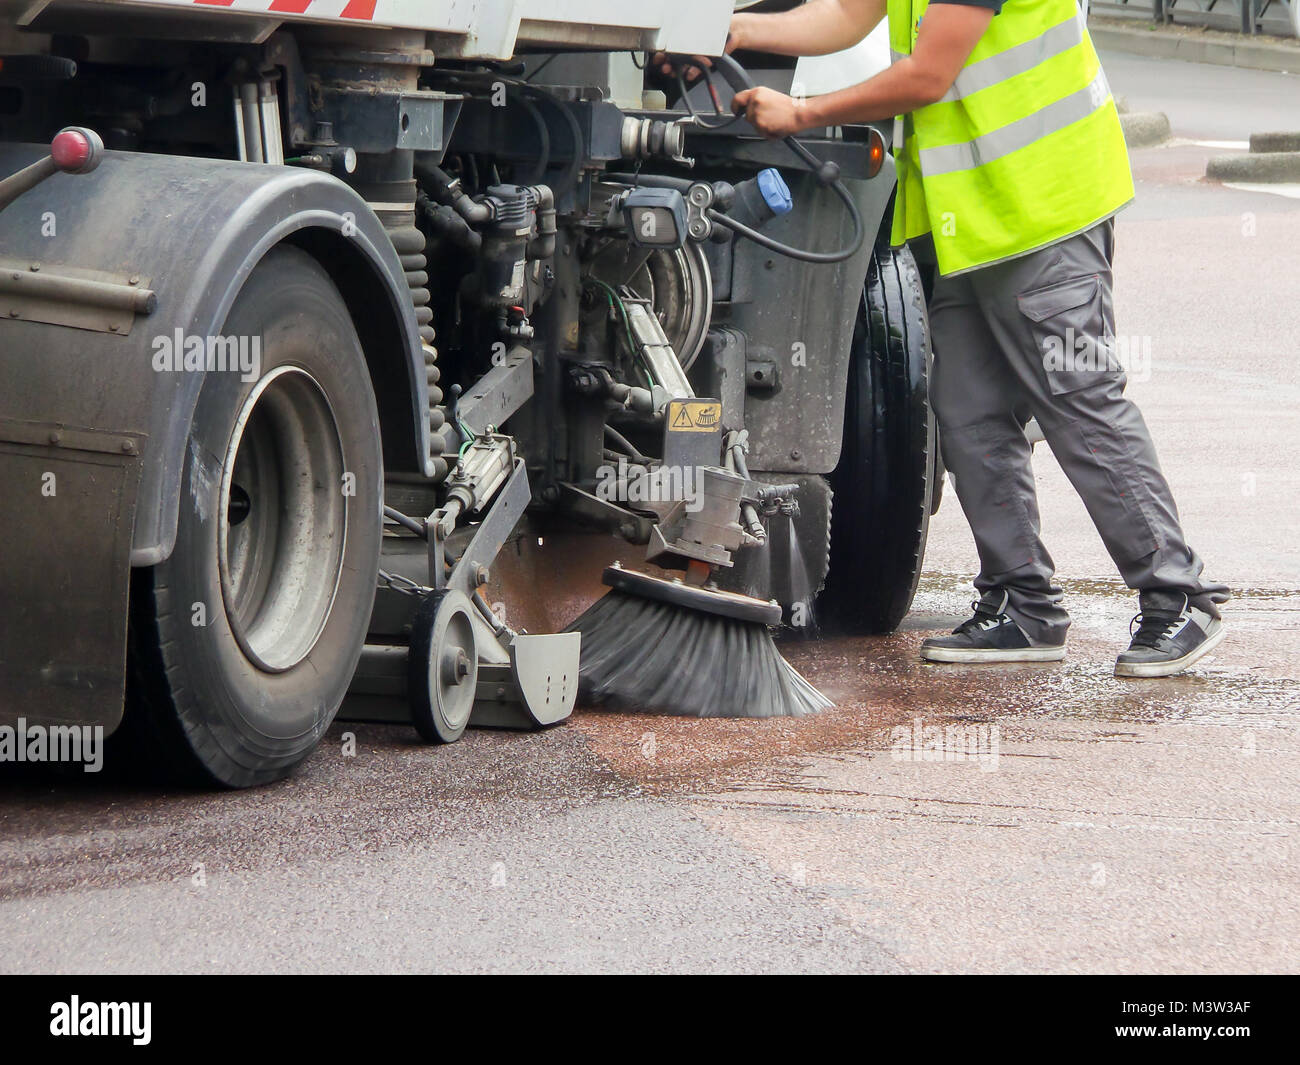 Worker with a truck cleaning a street Stock Photo